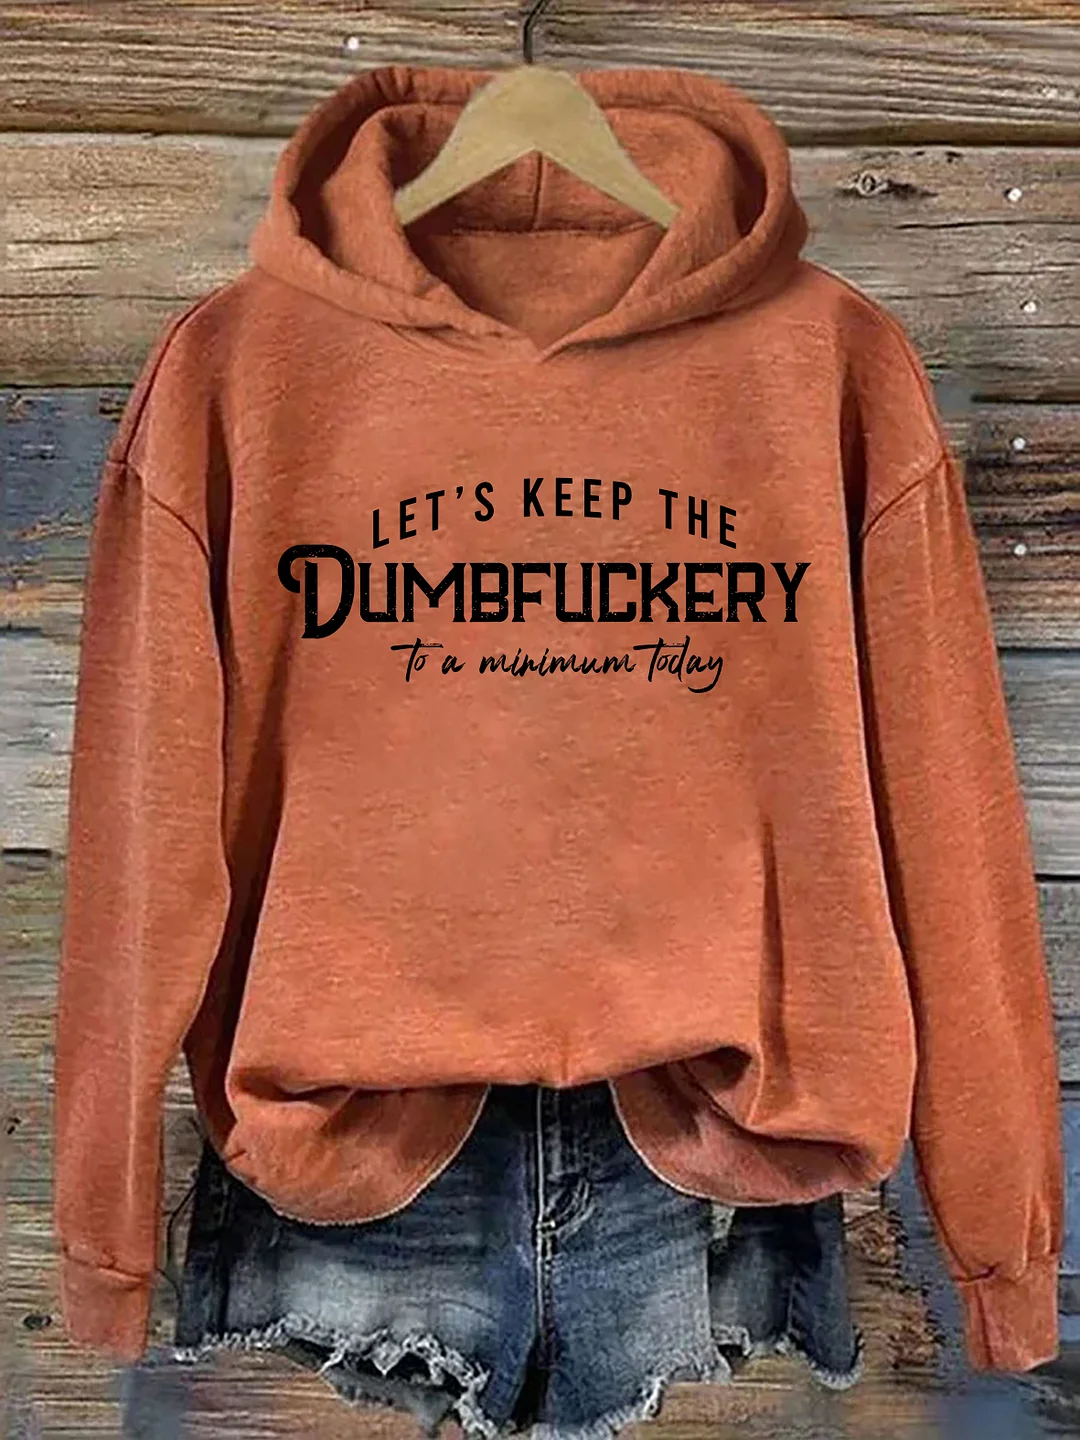 Let's Keep The Dumbfuckery To a Minimum Today Hoodie